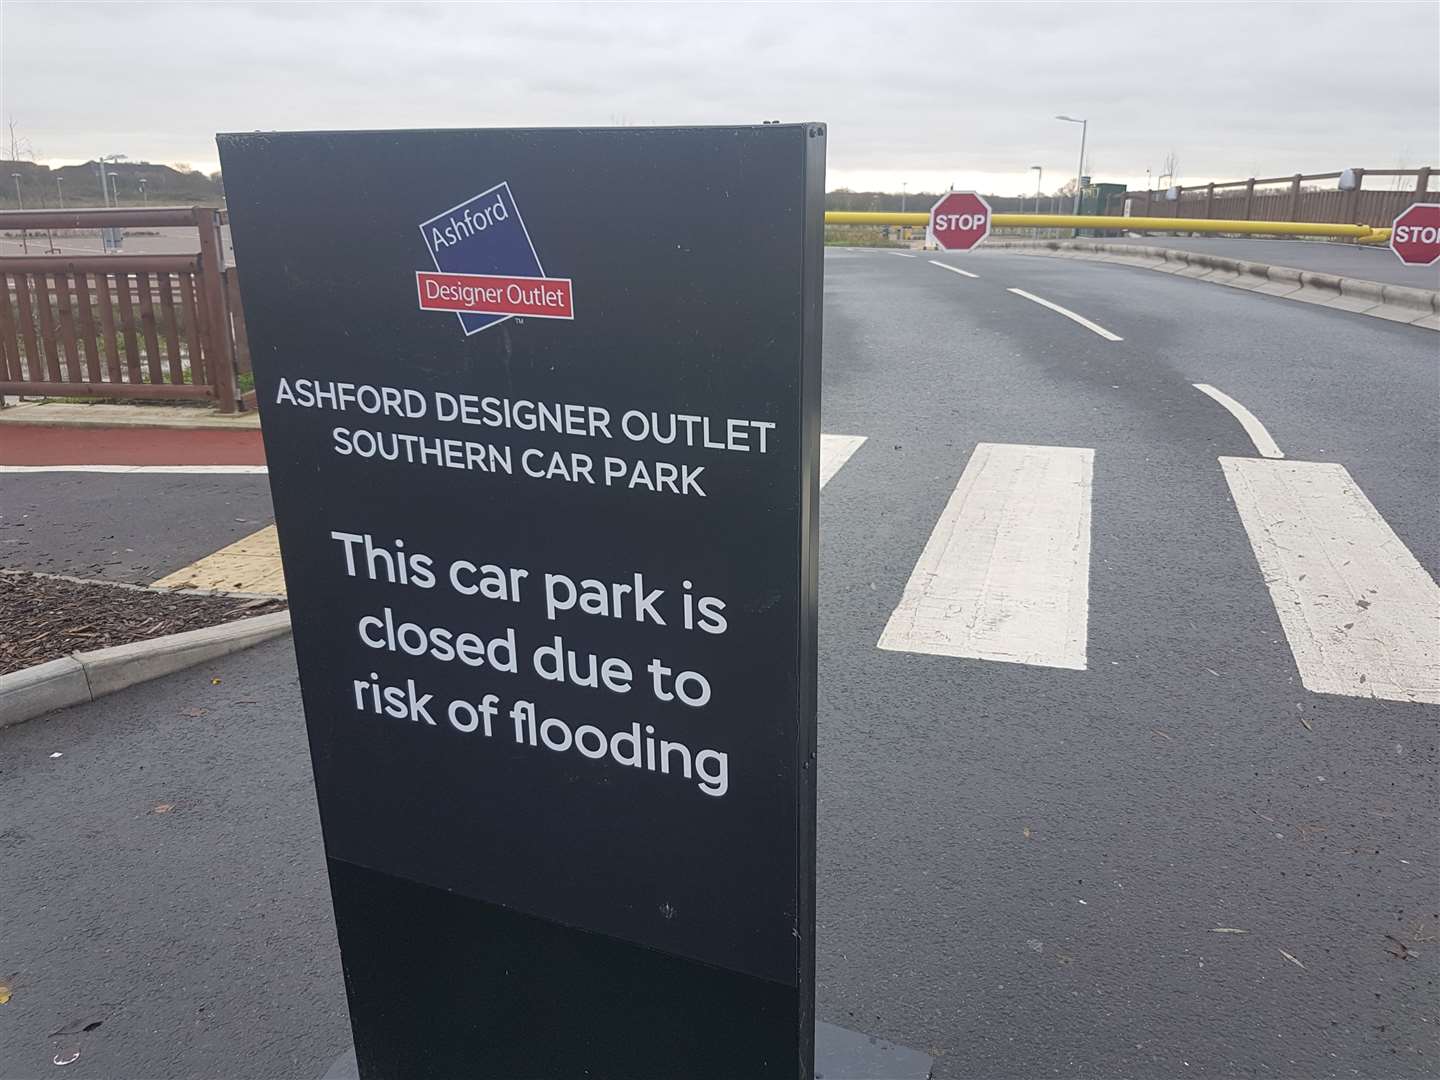 A sign has been put up by Ashford Designer Outlet declaring the car park closed